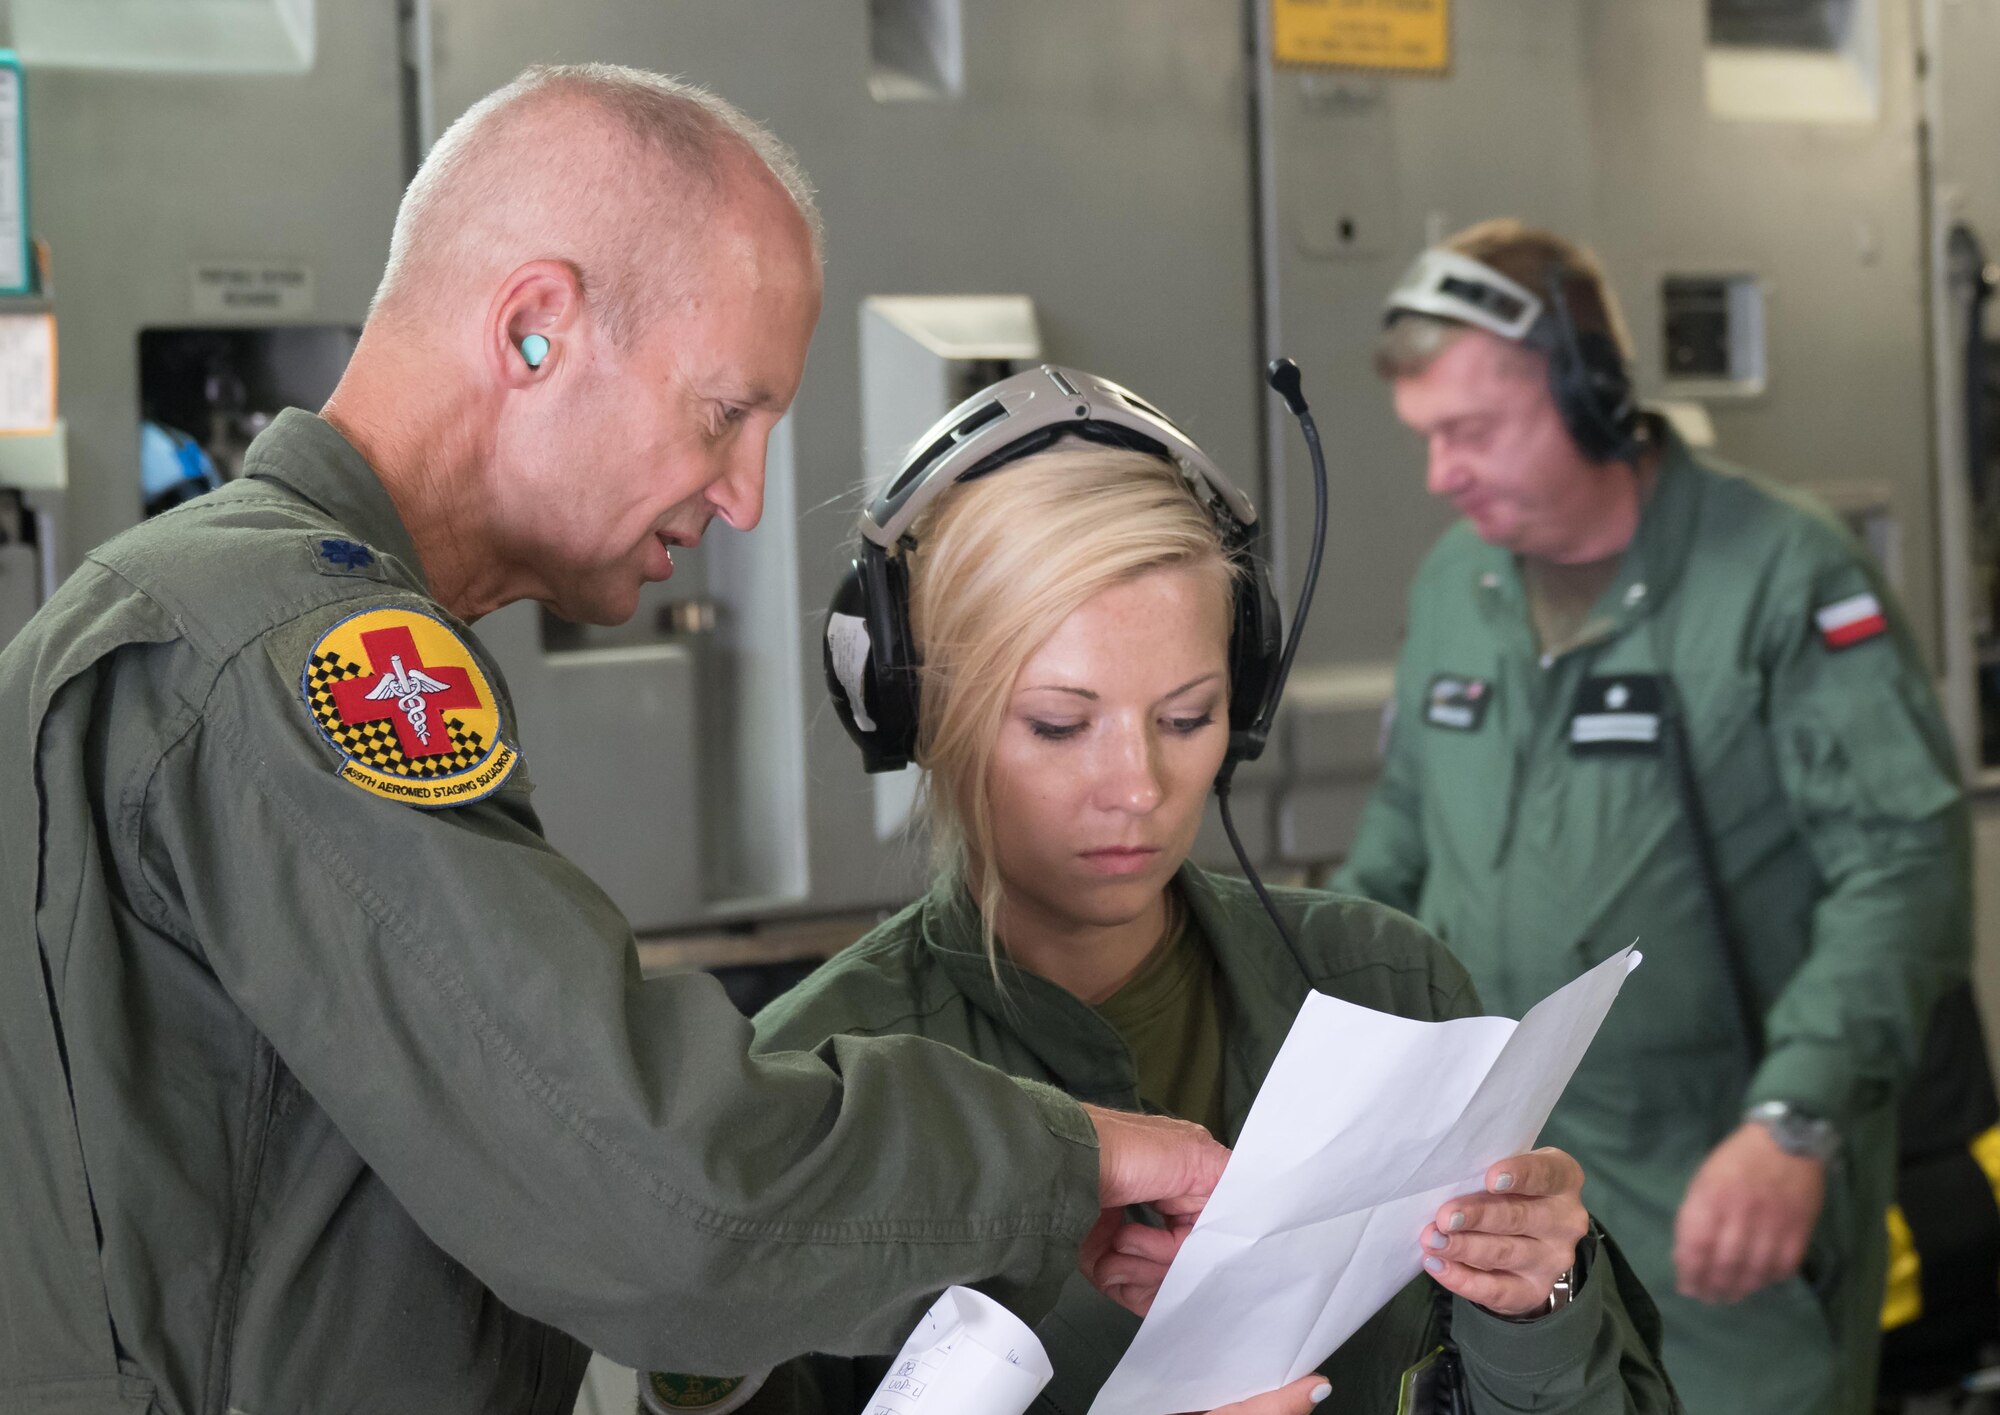 Lt. Col. Patrick Falvey, 459th AES, Joint Base Andrews, Md., reviews procedures with Lt. Marzena Dudaryk of the Polish Air Force. (Air Force Photo/Paul Zadach)